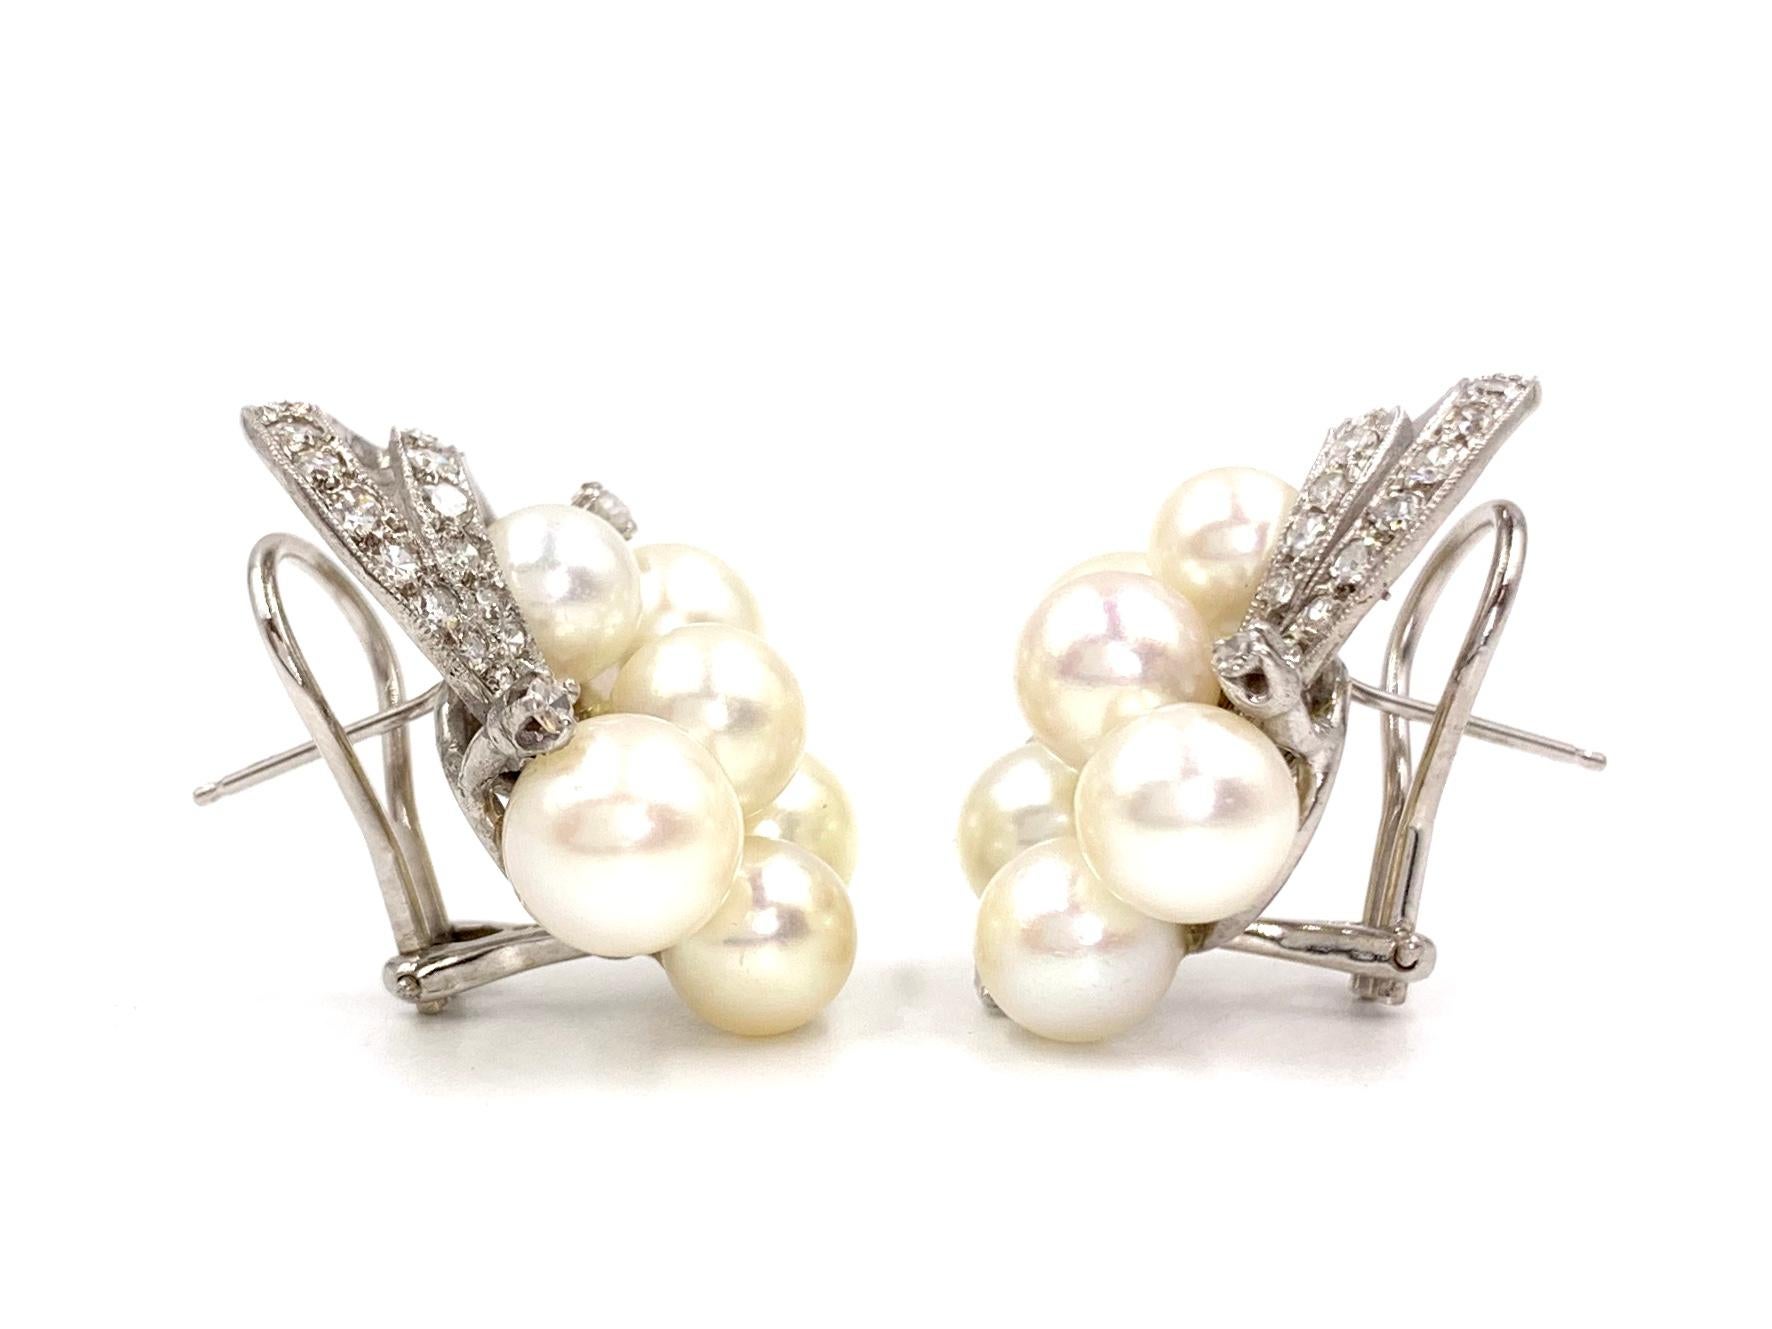 Circa 1960's, Edwardian inspired 14 karat white gold cultured pearl cluster drop earrings with single cut diamonds. Diamond total weight is approximately .40 carats total weight at approximately G color, SI1 clarity. Natural pearls have a beautiful